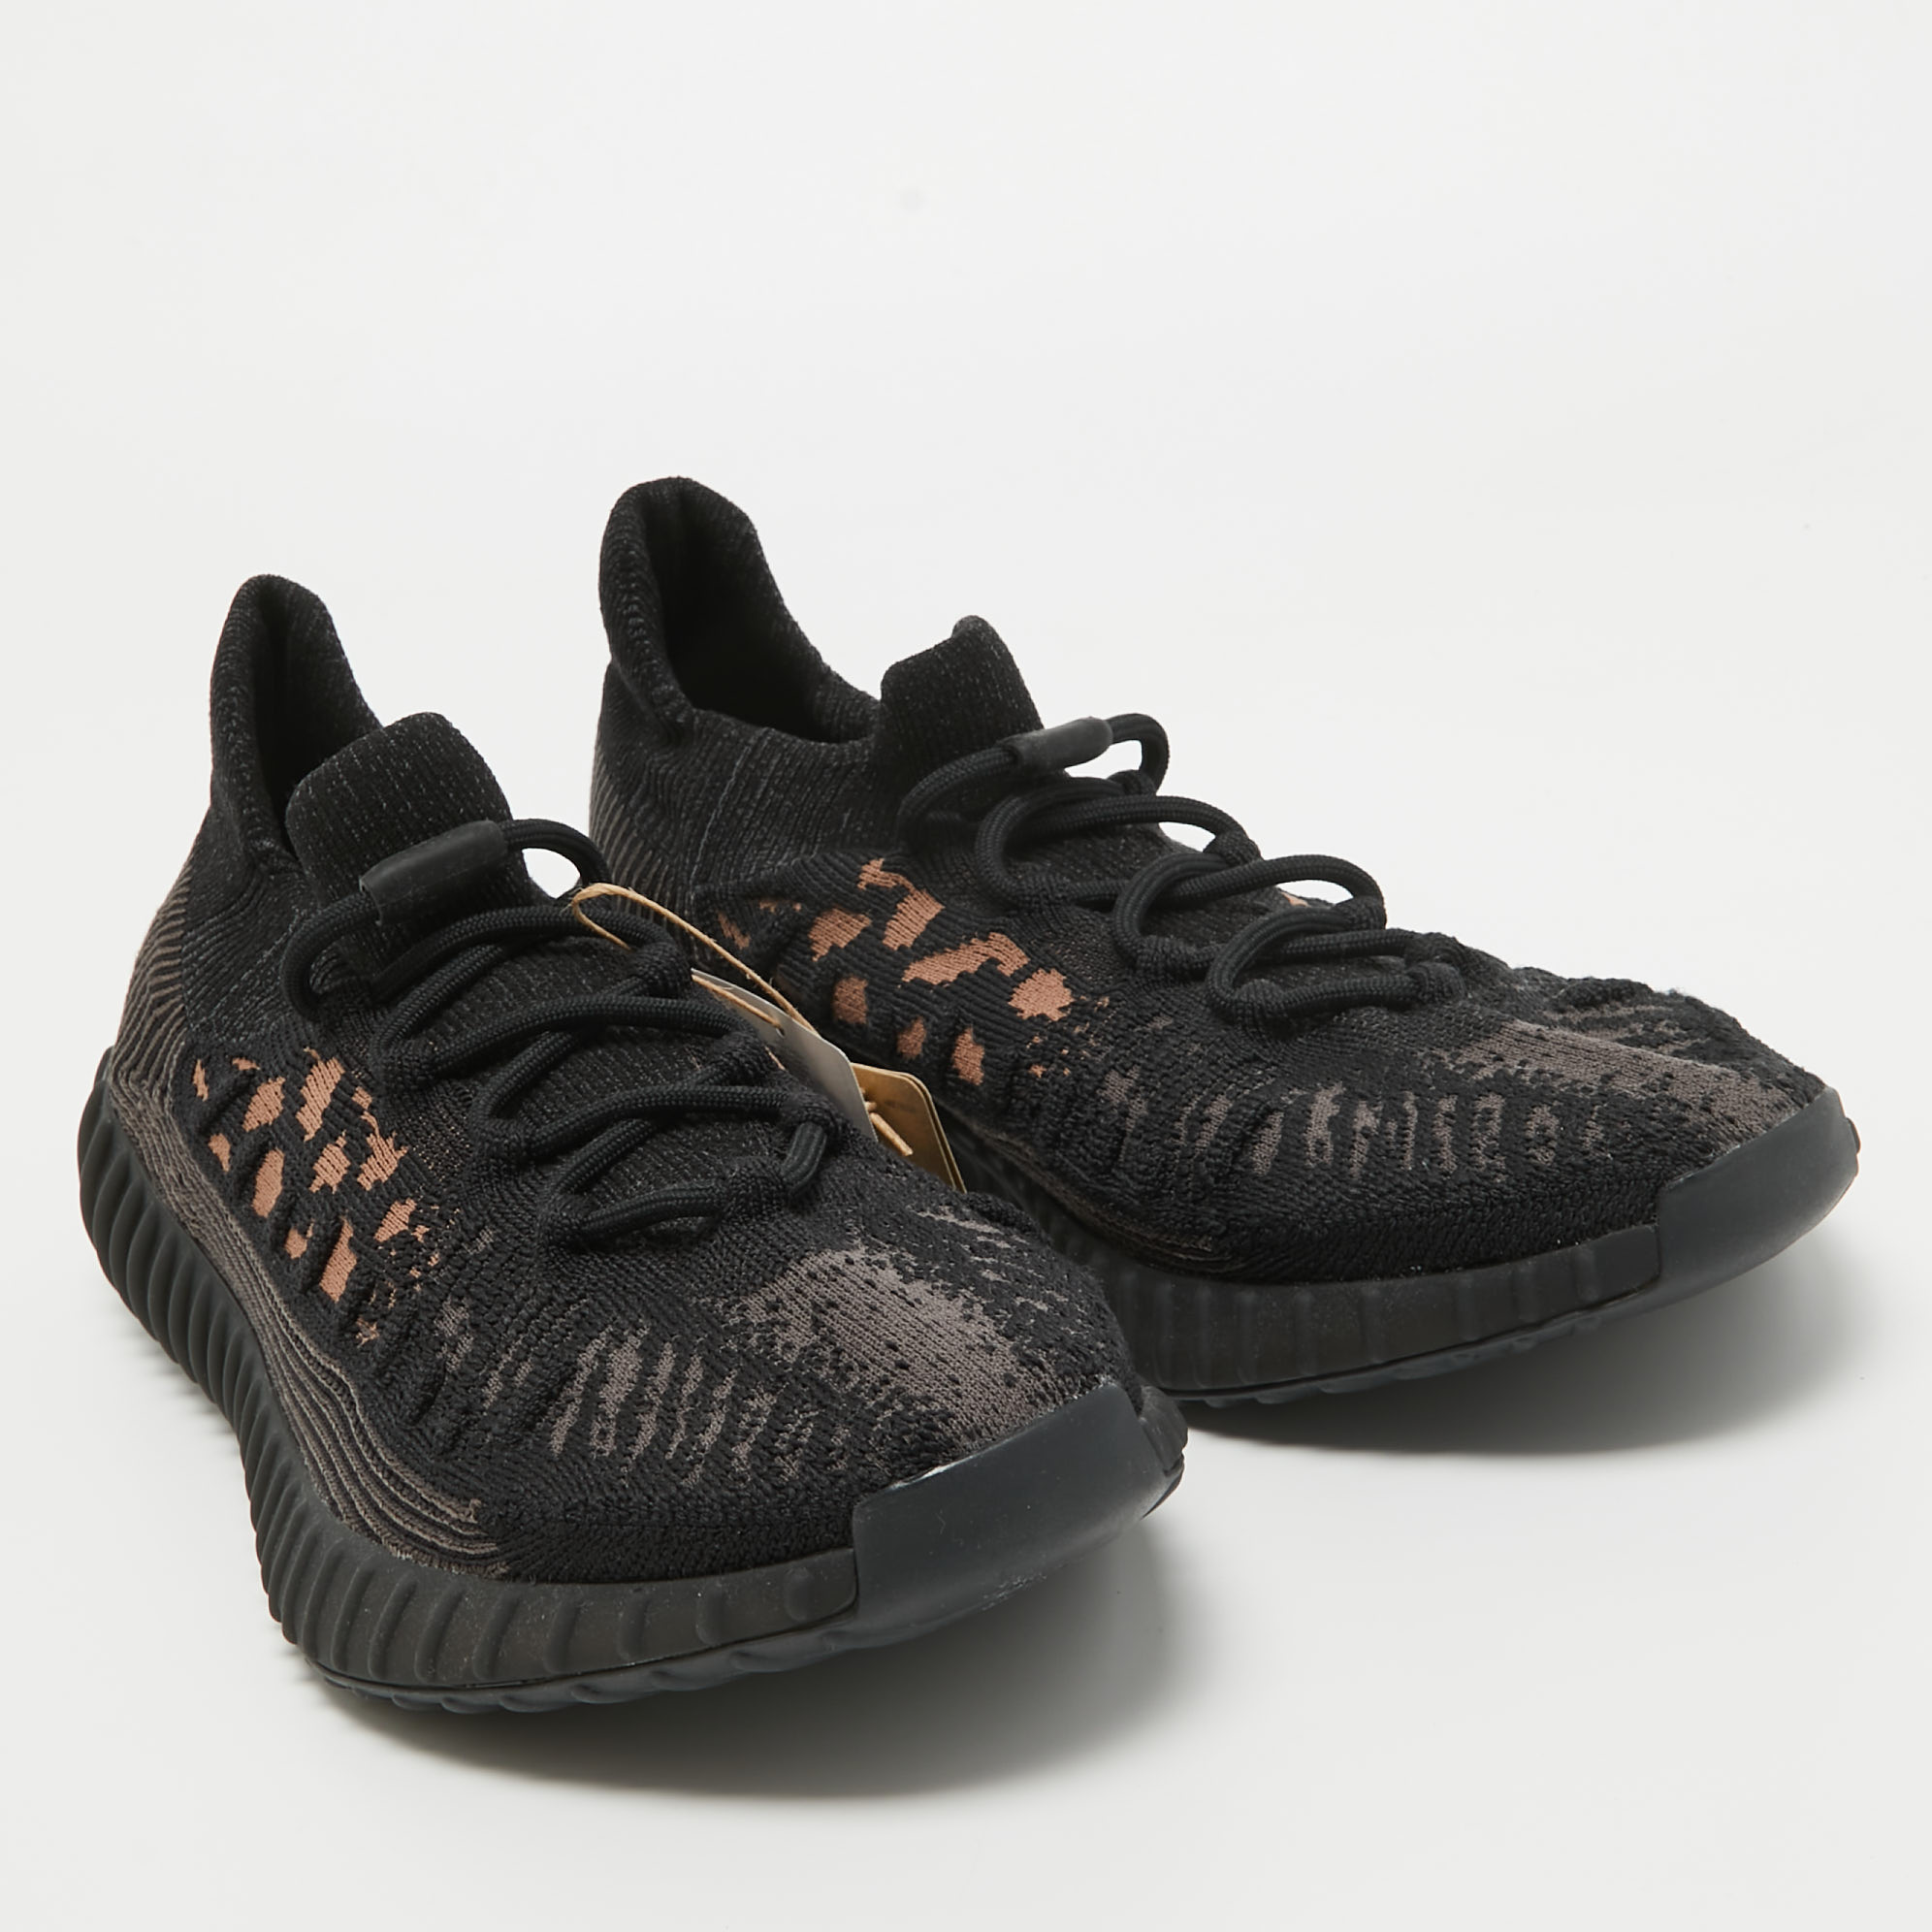 Yeezy X Adidas Black Knit Fabric Boost 350 V2 CMPCT Slate Carbon Sneakers Size 47 1/3